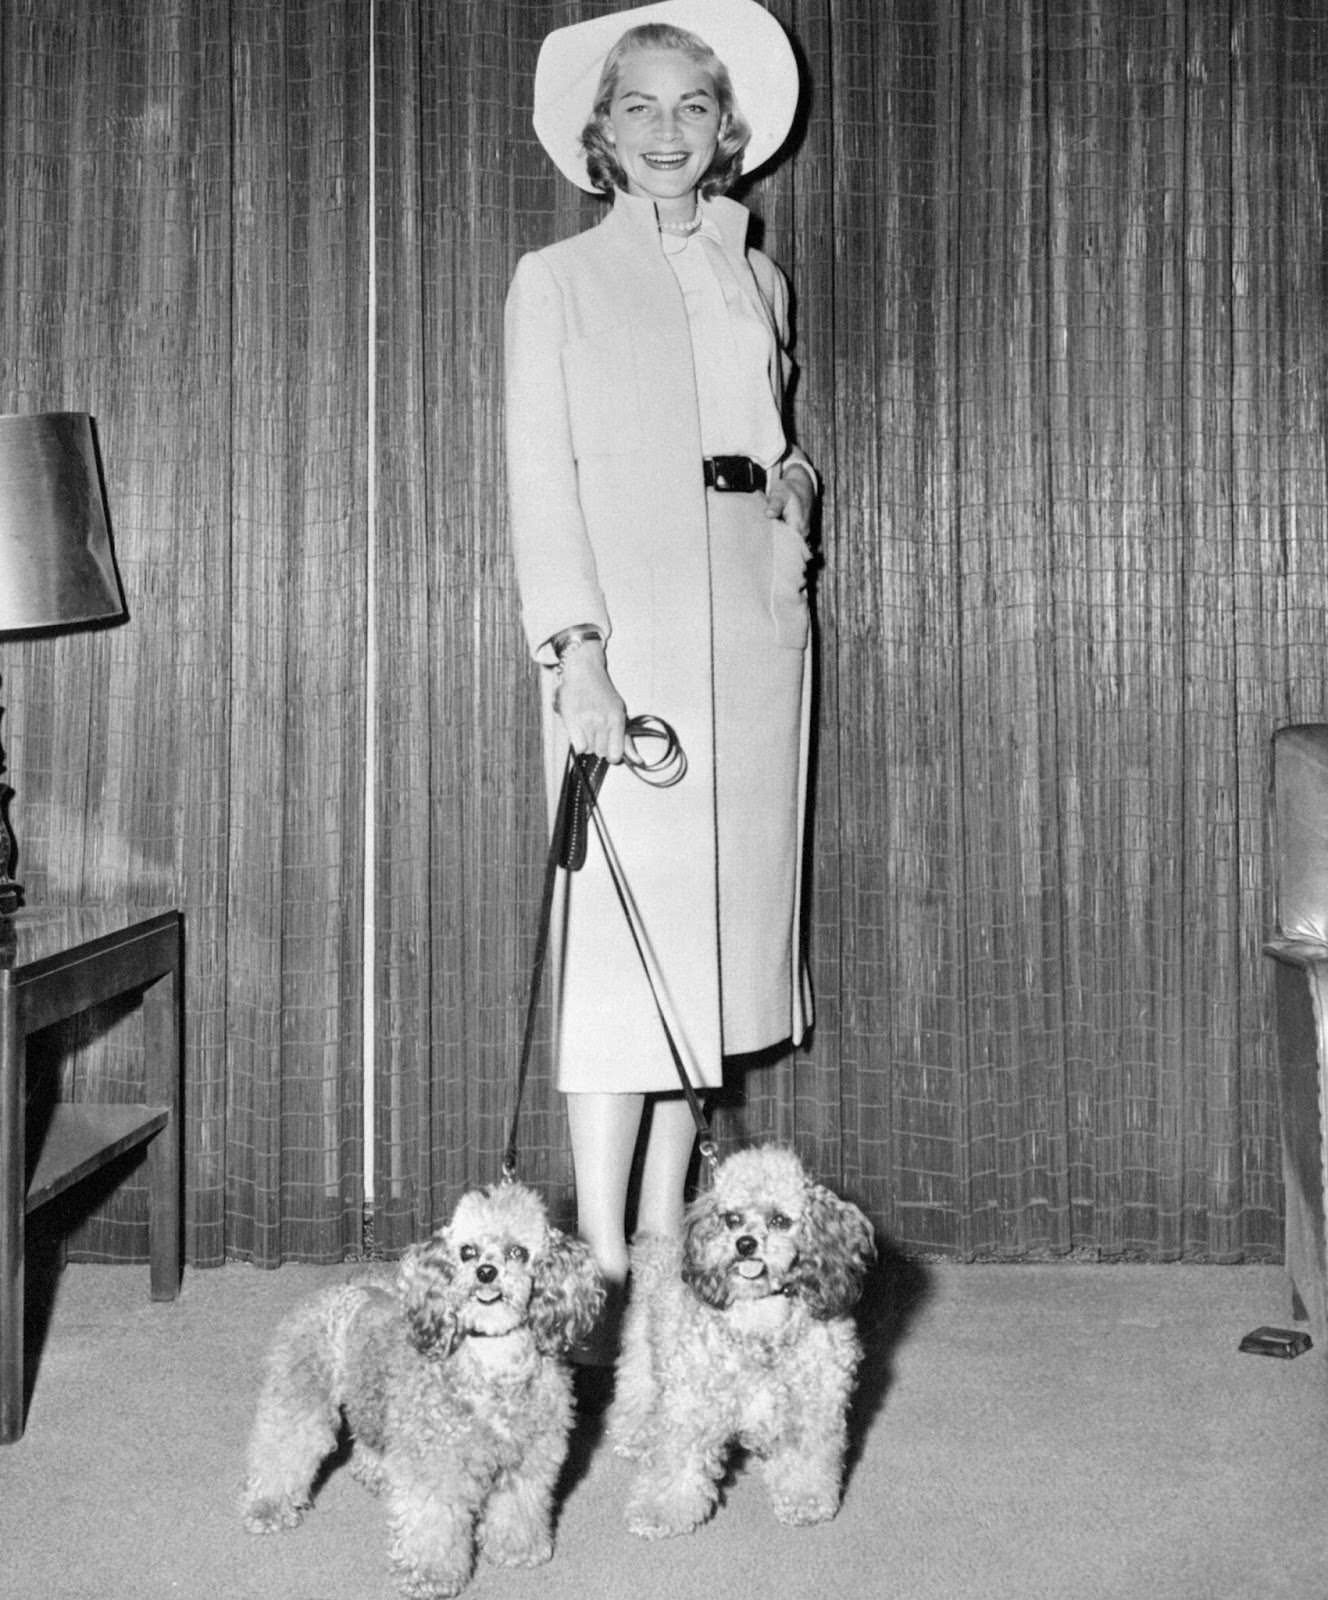 The dog lover sported clean-cut separates and a wide-brimmed hat in 1957.